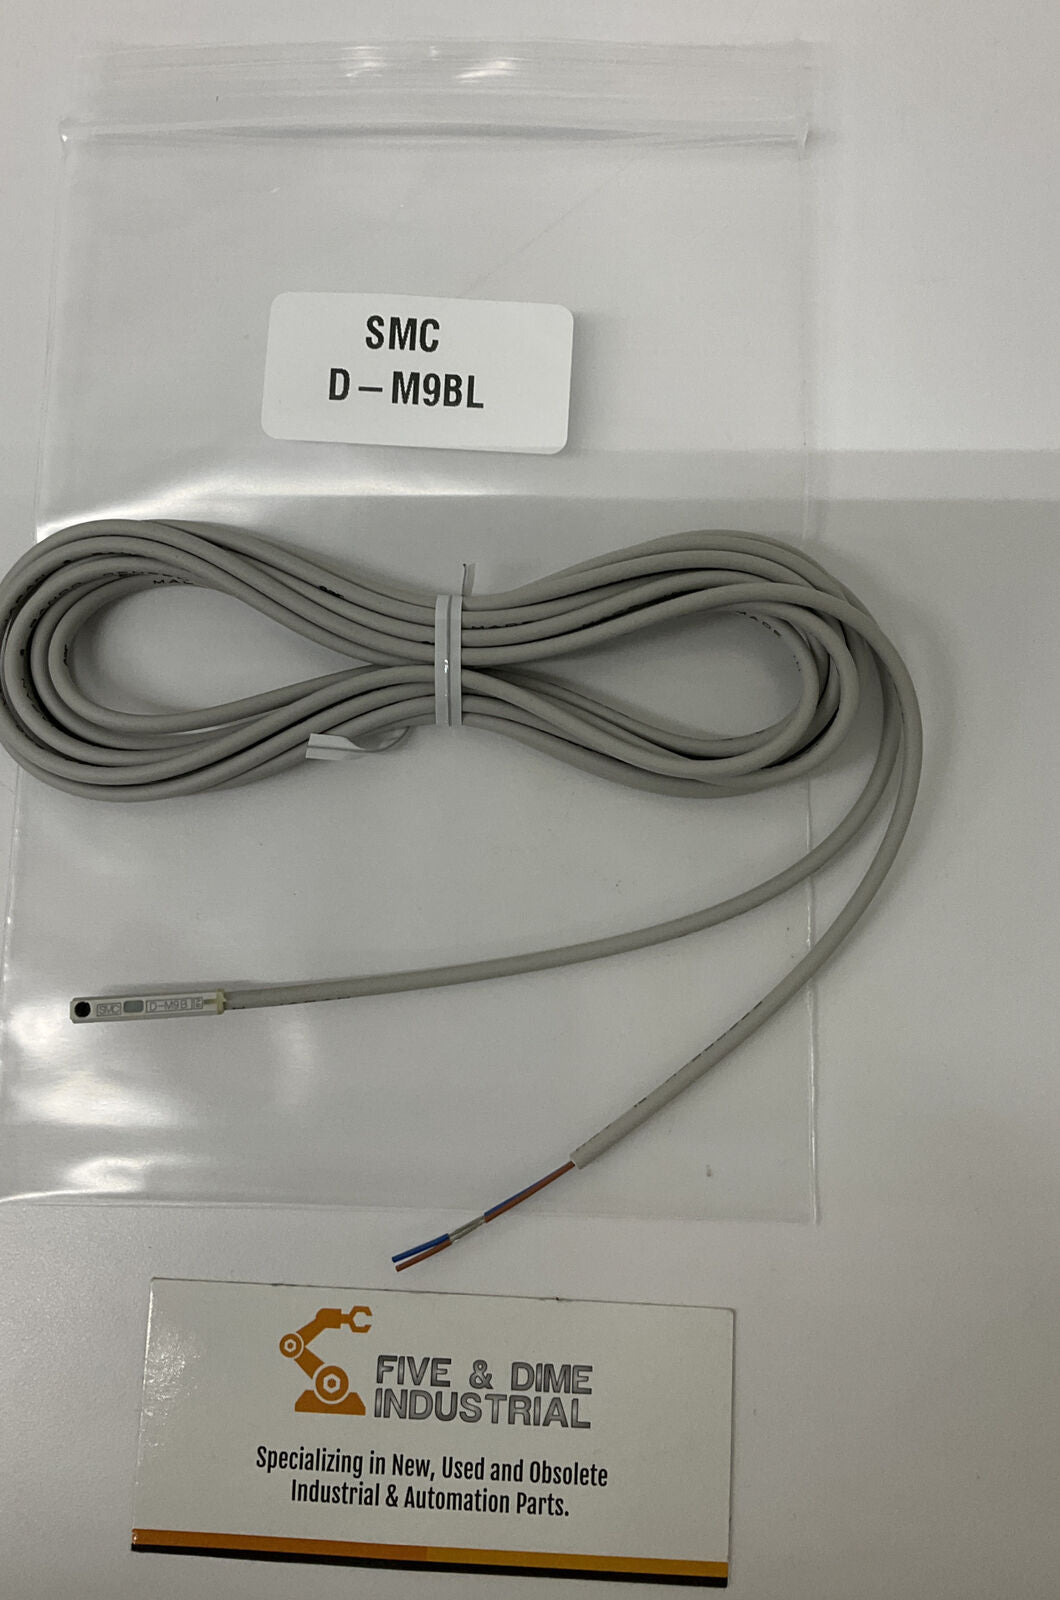 SMC  D-M9BL  Reed Switch Sensor  2-wire  3 Meters (RE190)